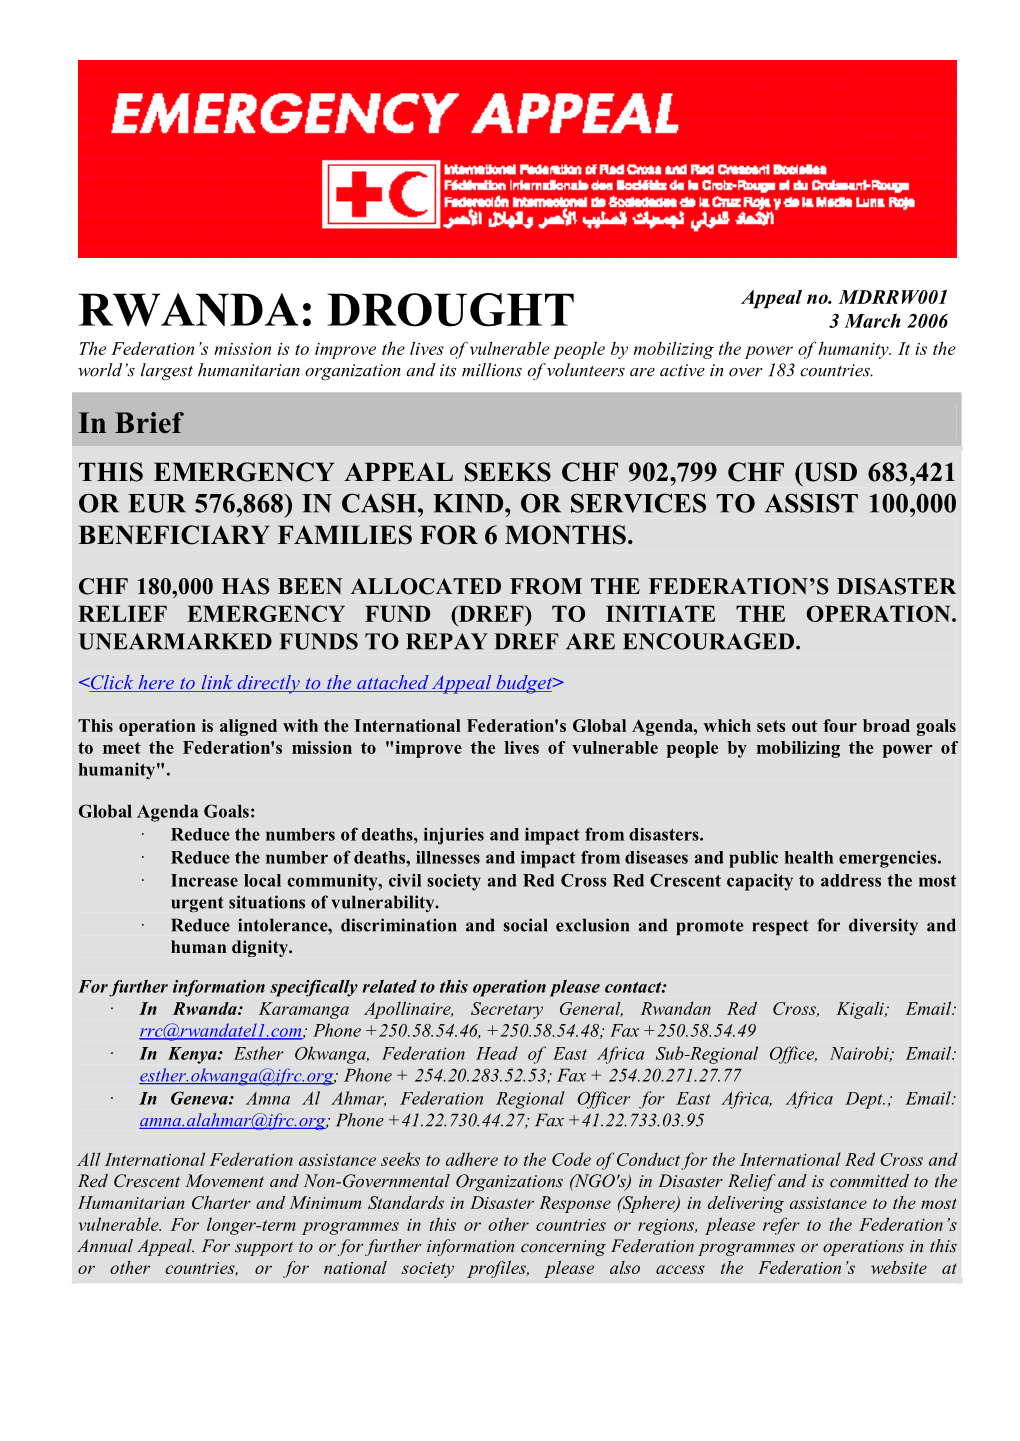 RWANDA: DROUGHT 3 March 2006 the Federation’S Mission Is to Improve the Lives of Vulnerable People by Mobilizing the Power of Humanity